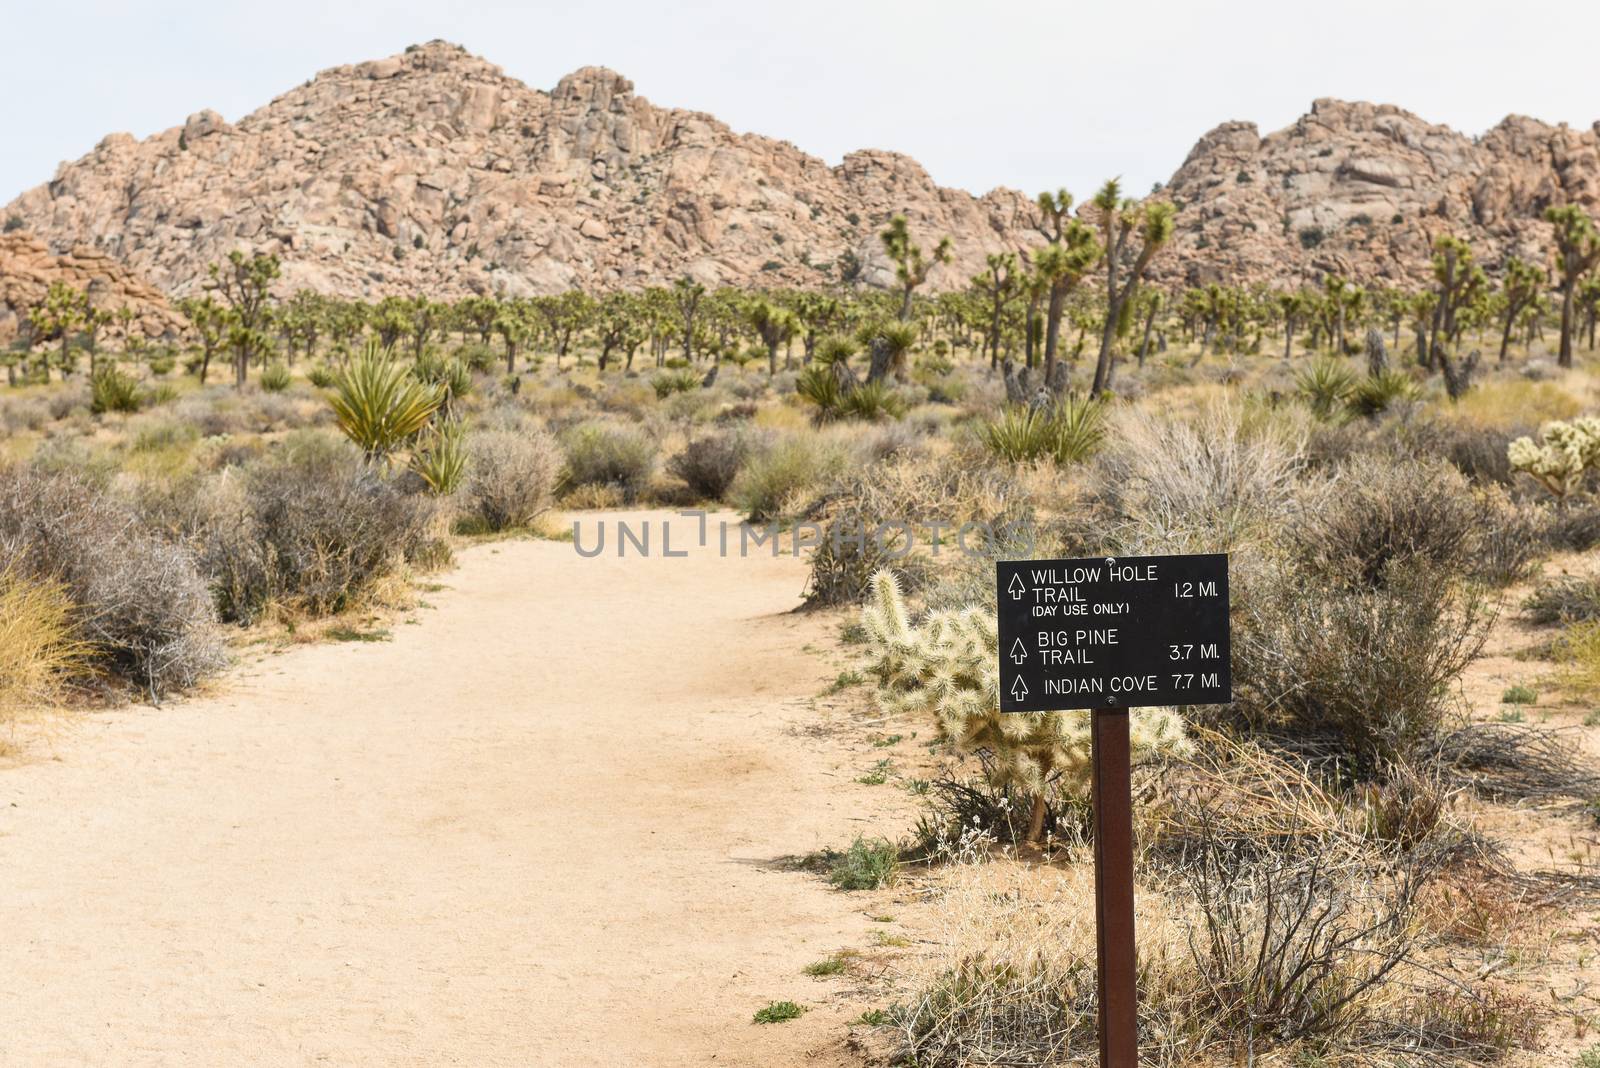 Trail sign on Boy Scout Trail in Joshua Tree National Park, Cali by Njean